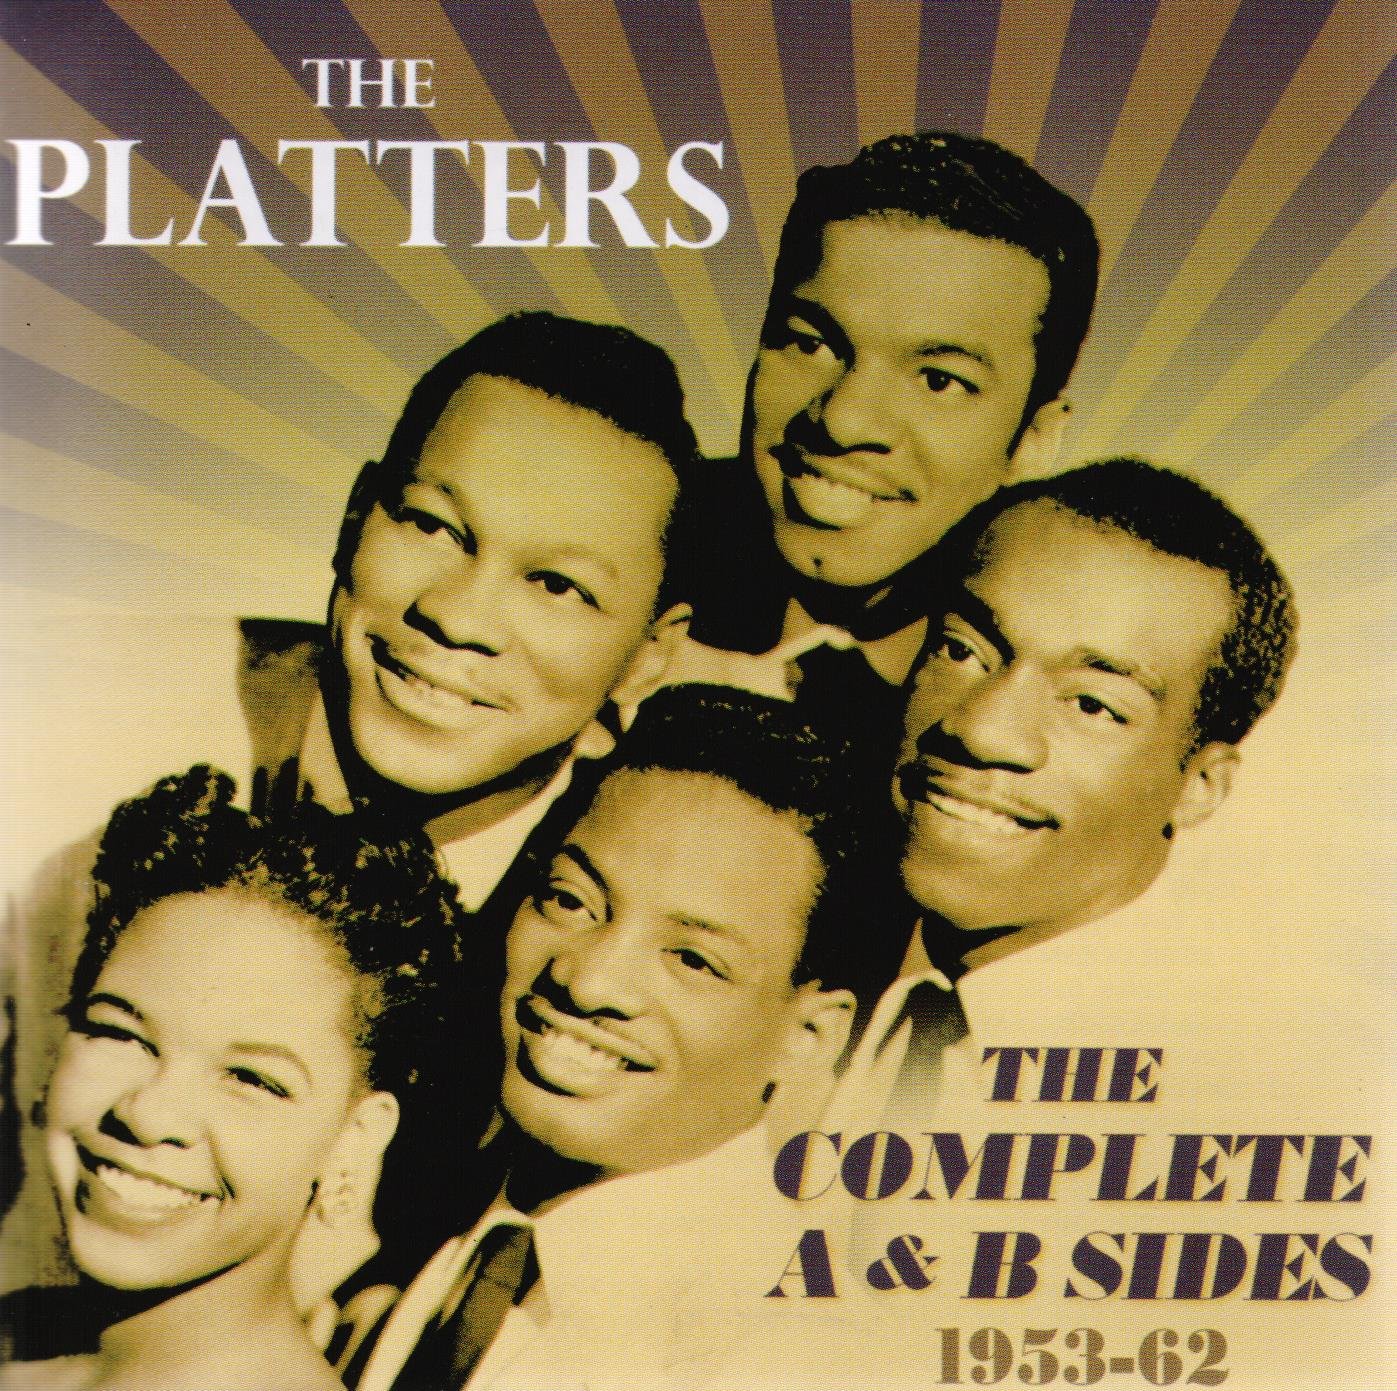 The Platters first hit song, Only You, at Vinyl Record Memories.